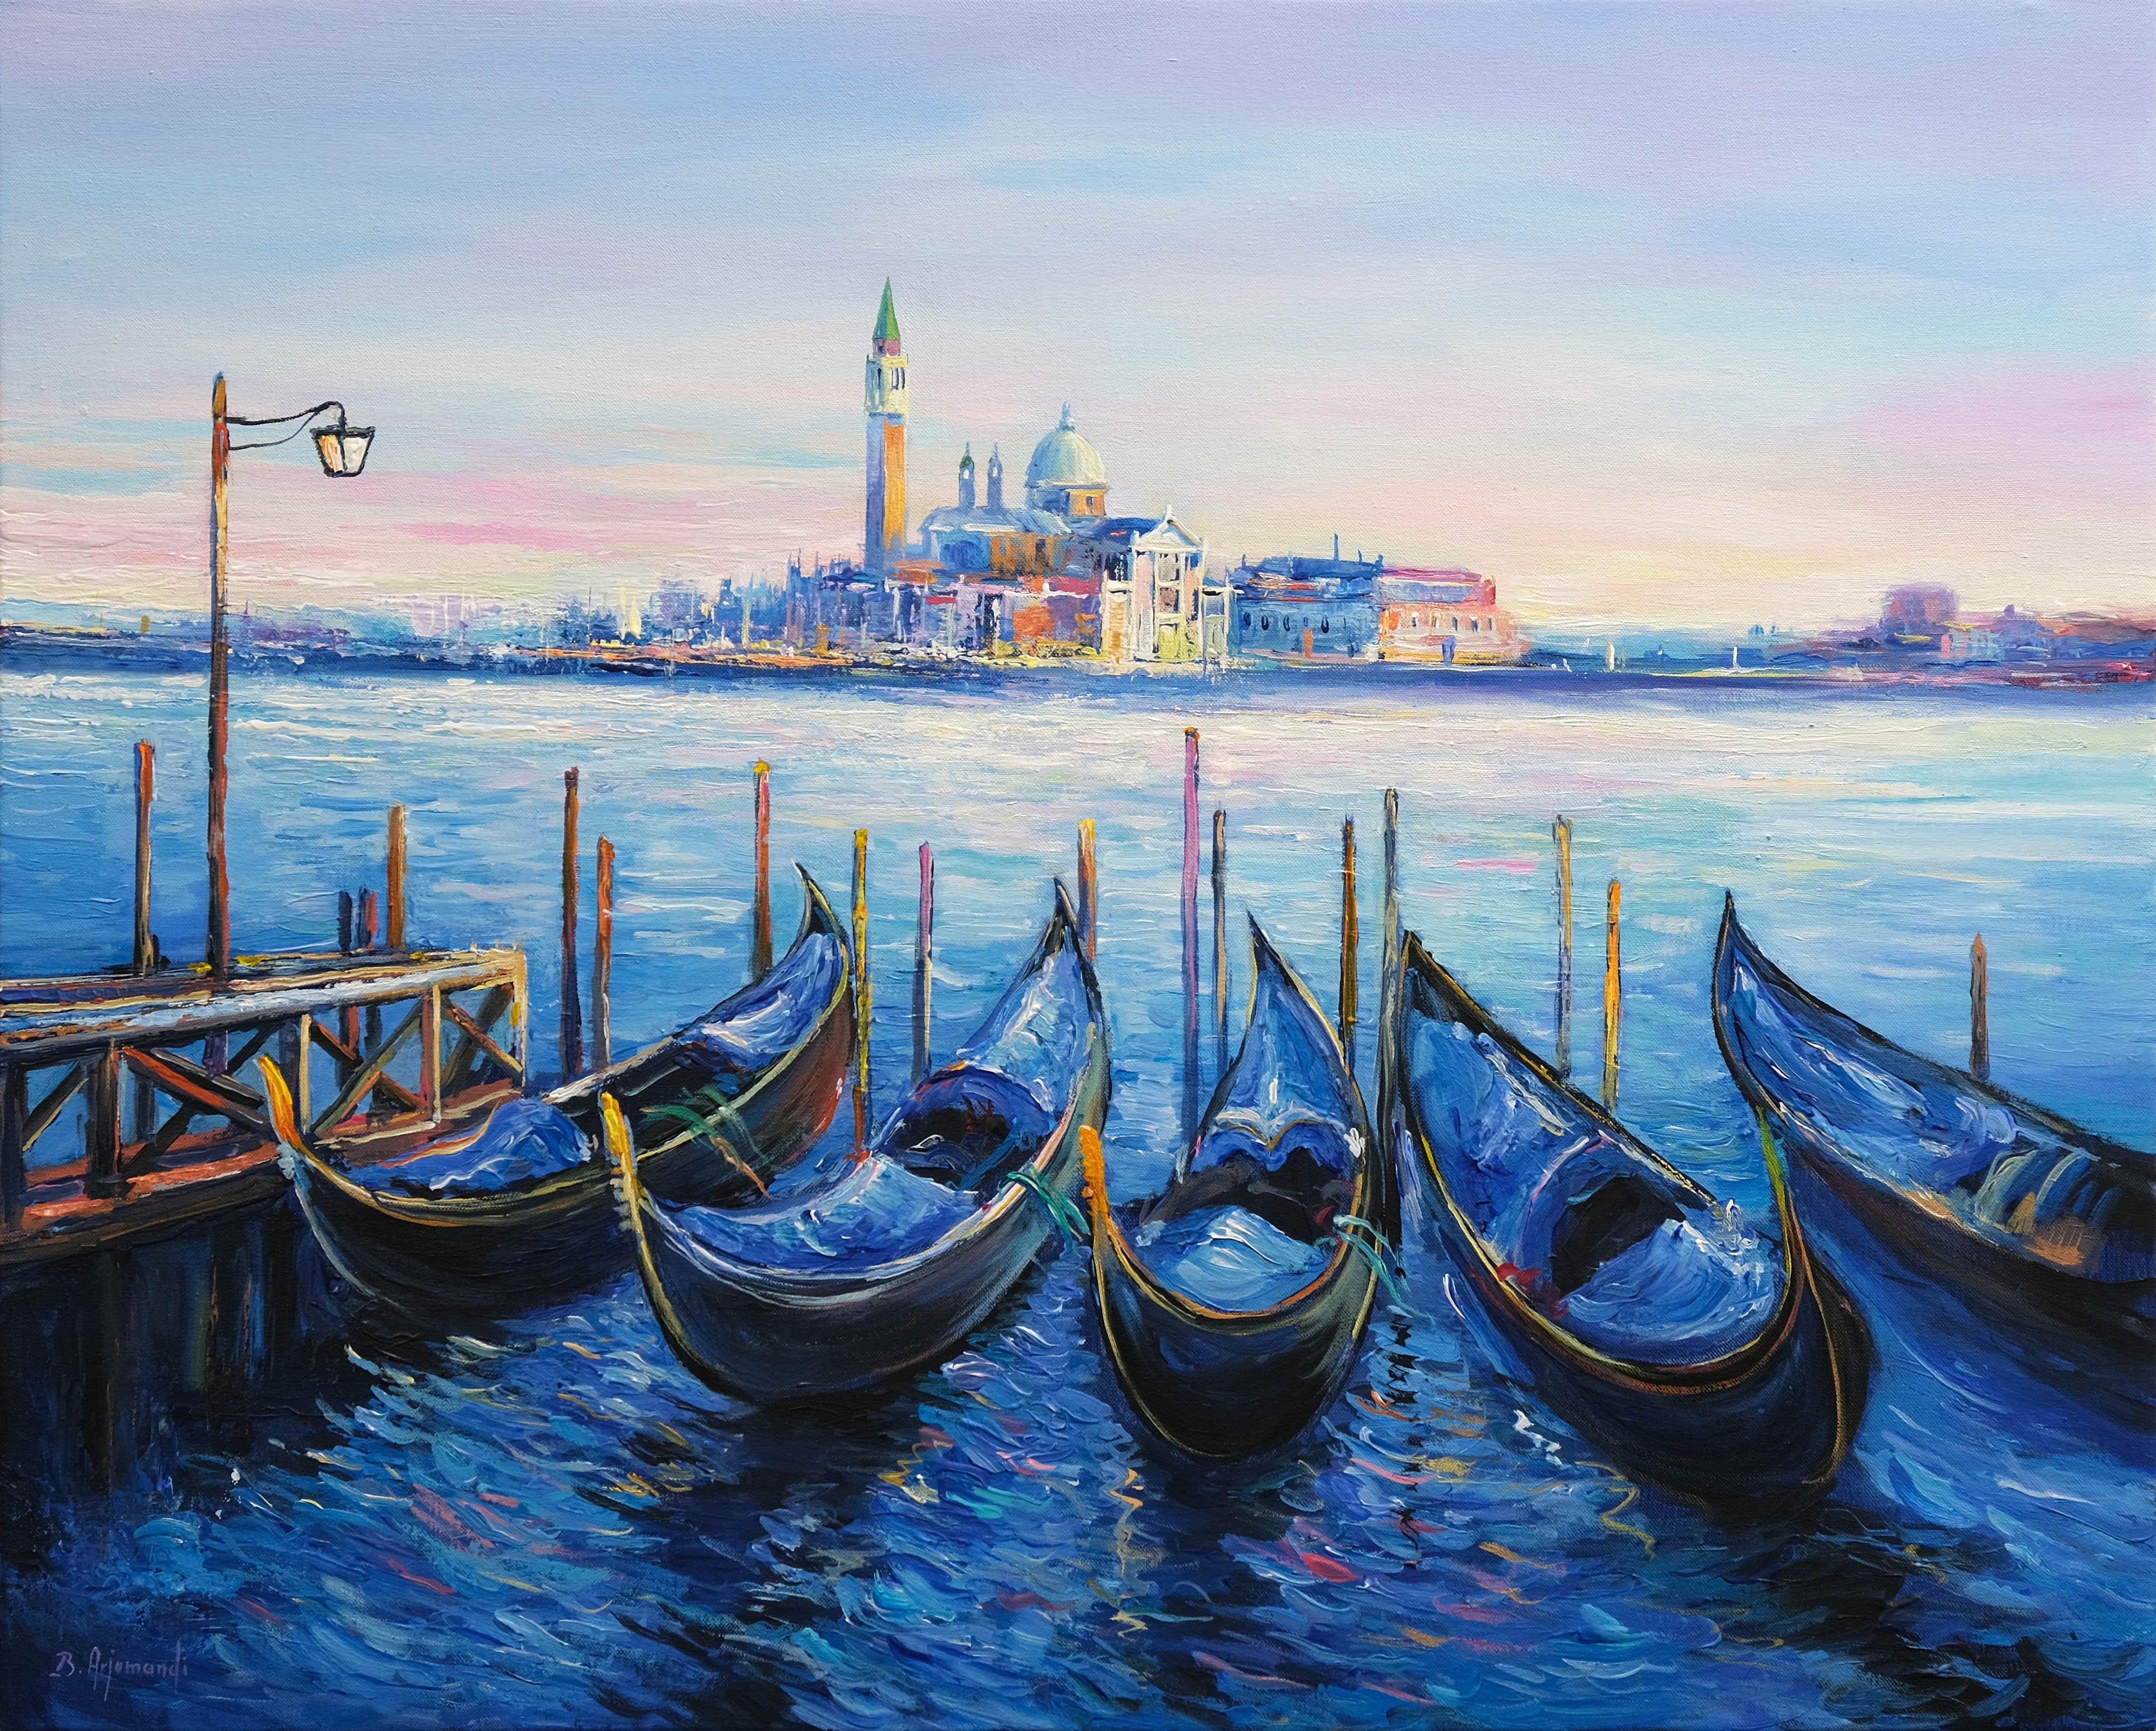 Original painting of the romantic city of Venice.  It was painted in multiple layers with palette knife and brushes.  The artwork is signed on the front and includes a Certificate of Authenticity.  The painting is done on stretched canvas using top